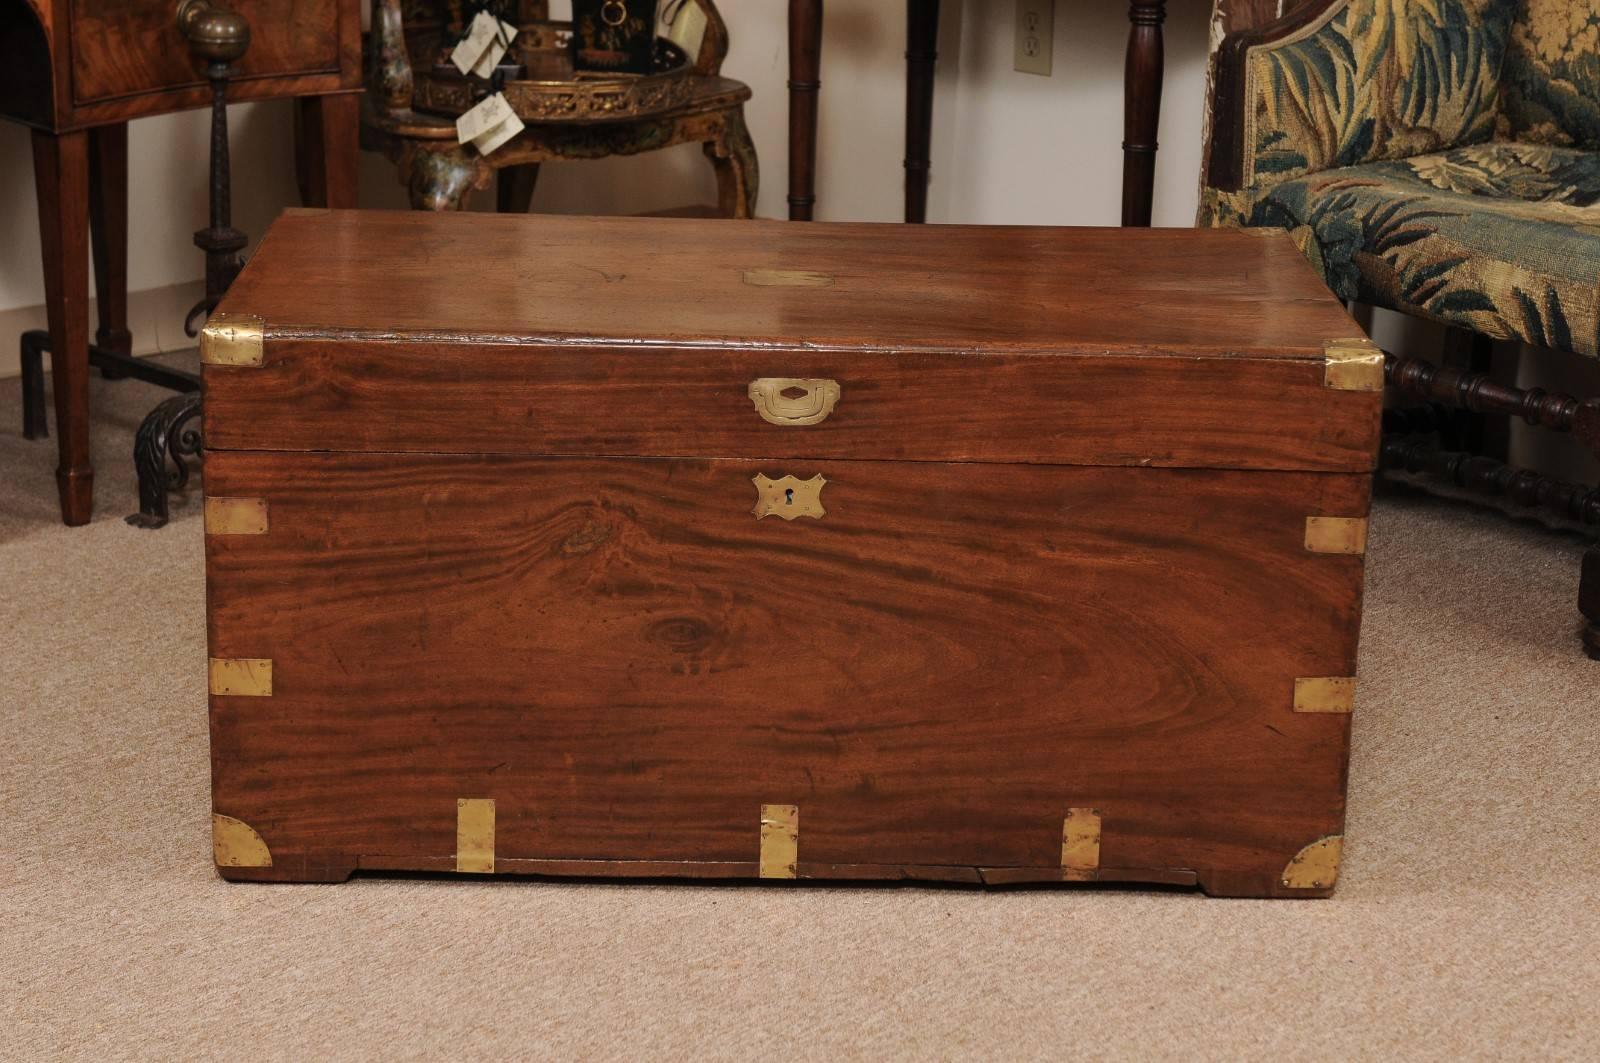 Brass-mounted mahogany trunk with hinged lift top and brass handles, England, 19th century. This piece is very versatile and could be used as a storage chest, coffee table, bench, etc.